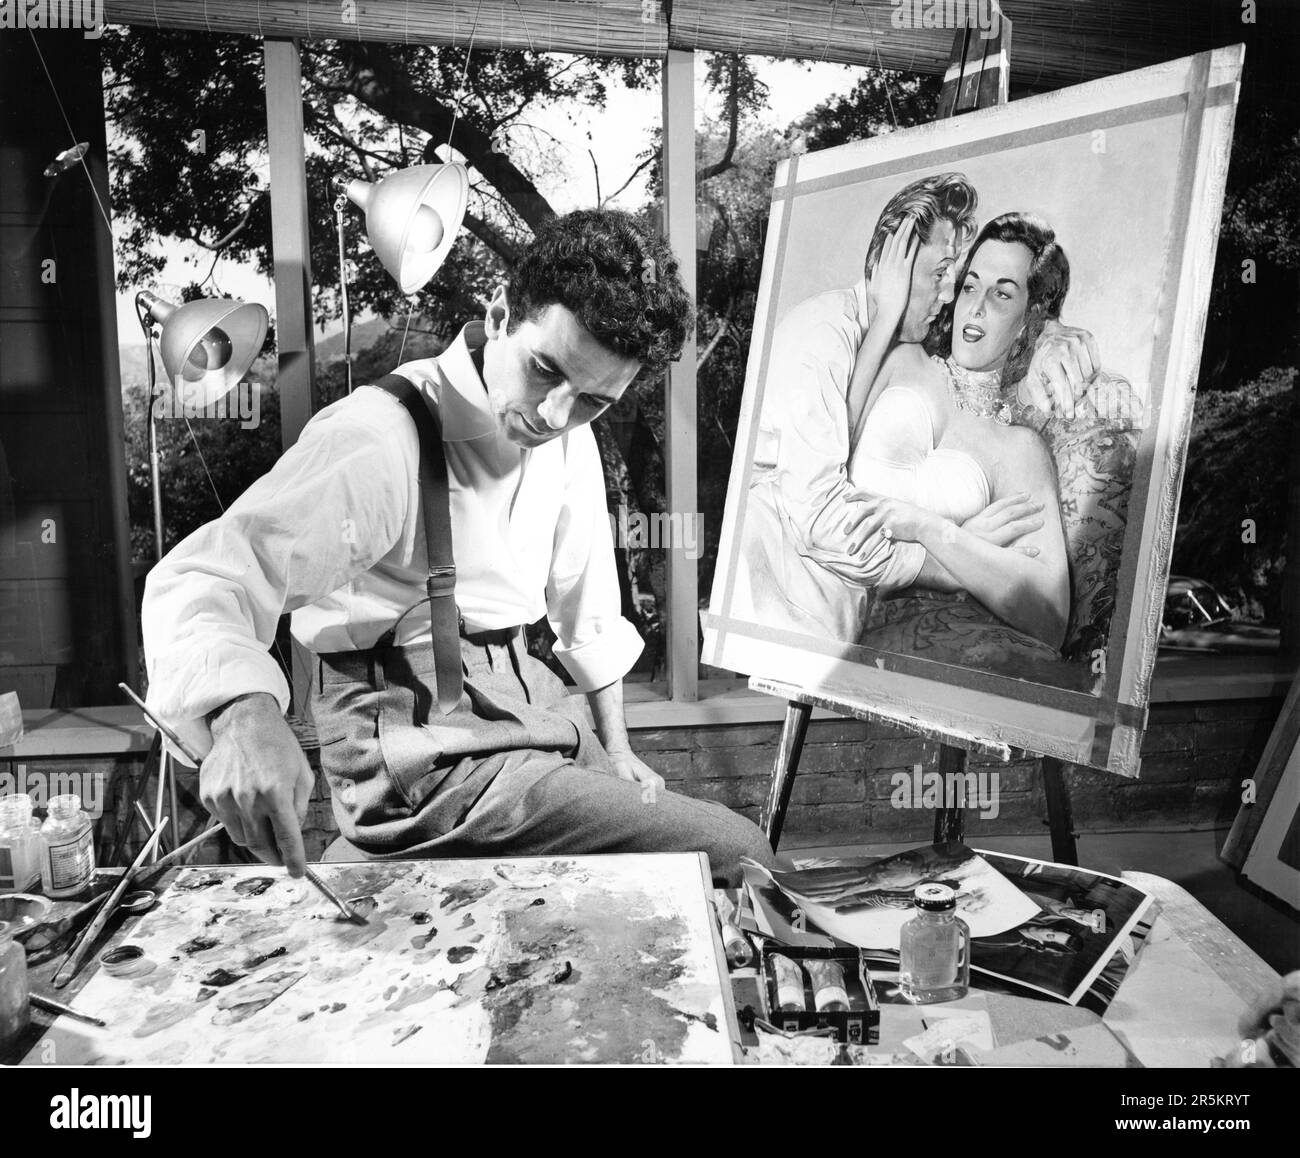 Artist MARIO ARMOND ZAMPARELLI creating the movie poster artwork for ROBERT MITCHUM and JANE RUSSELL in MACAO 1952 director JOSEF von STERNBERG executive producer Howard Hughes RKO Radio Pictures Stock Photo